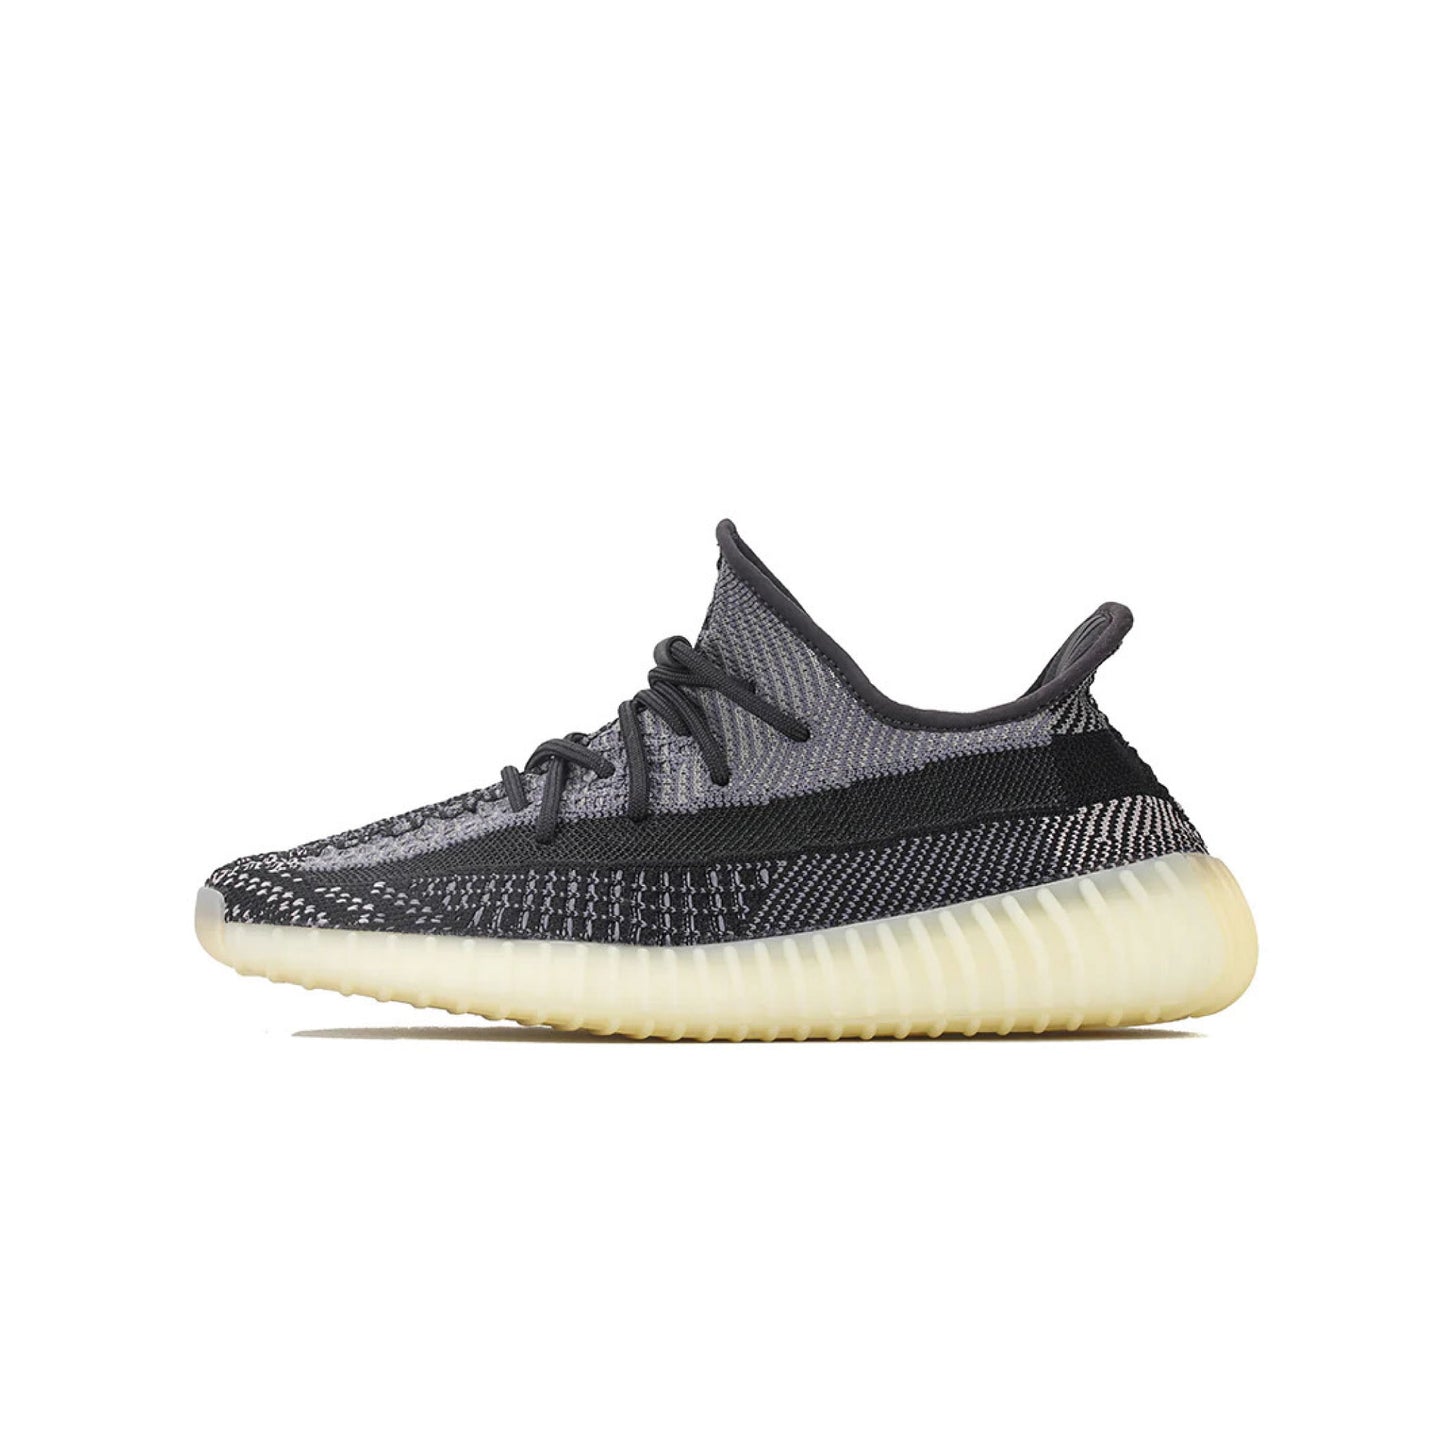 Adidas Yeezy Boost 350 V2 Carbon - 48h